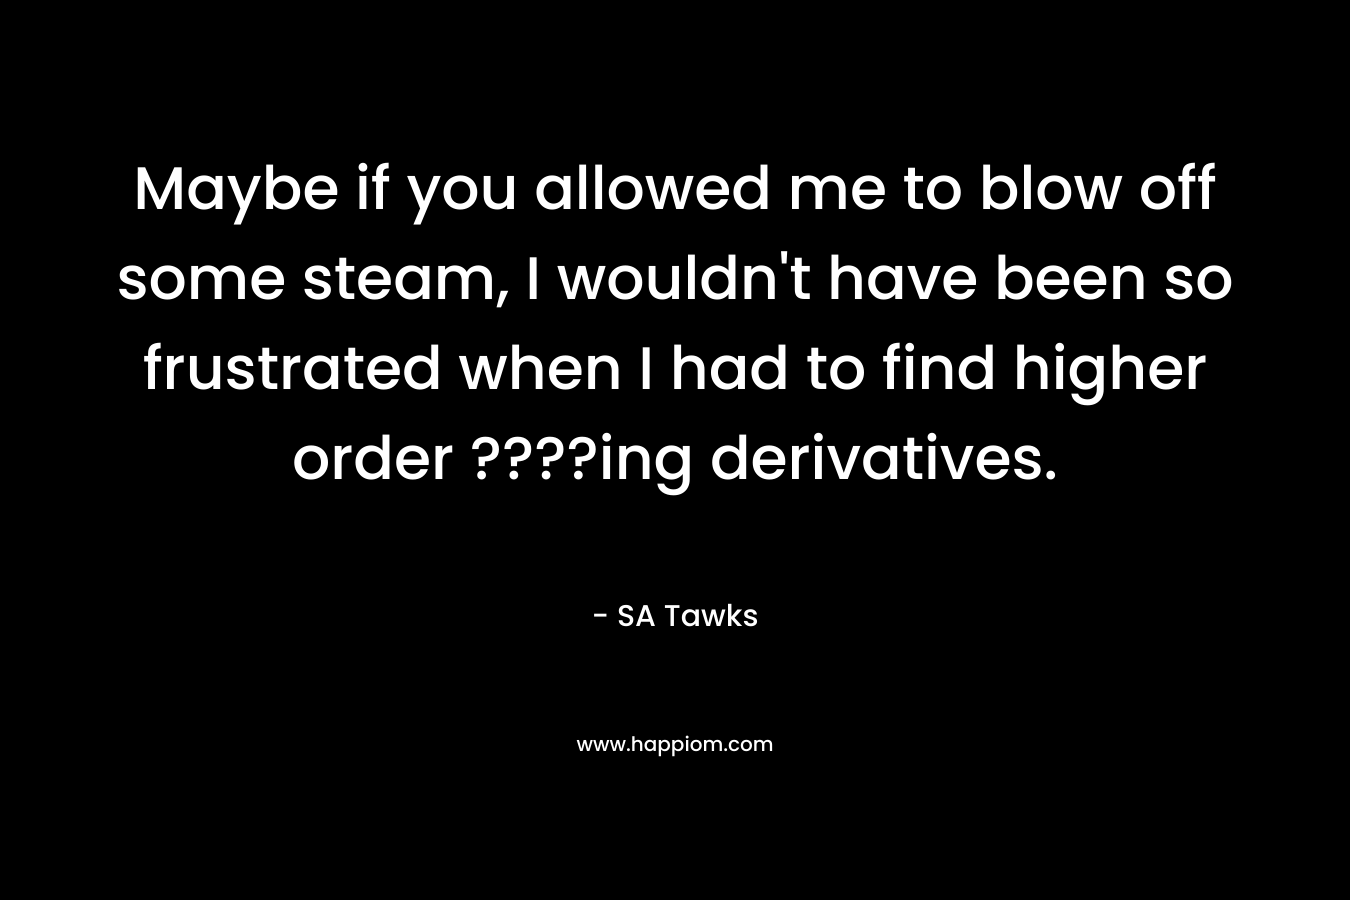 Maybe if you allowed me to blow off some steam, I wouldn’t have been so frustrated when I had to find higher order ????ing derivatives. – SA Tawks